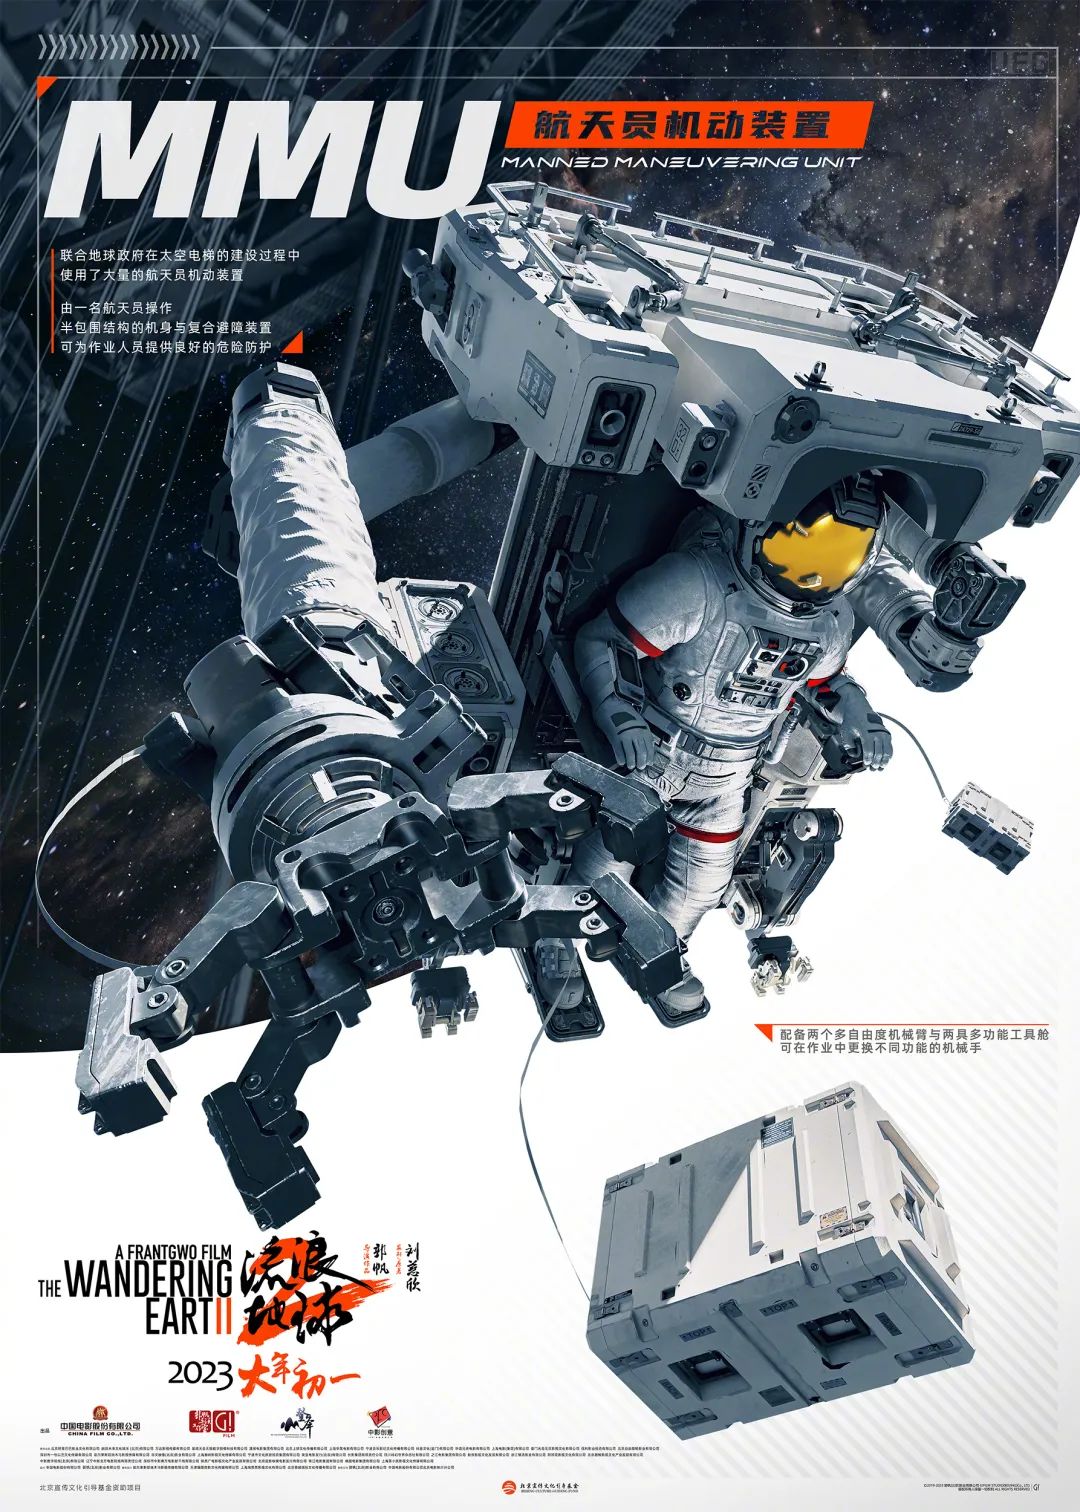 Concept in The Wandering Earth 2